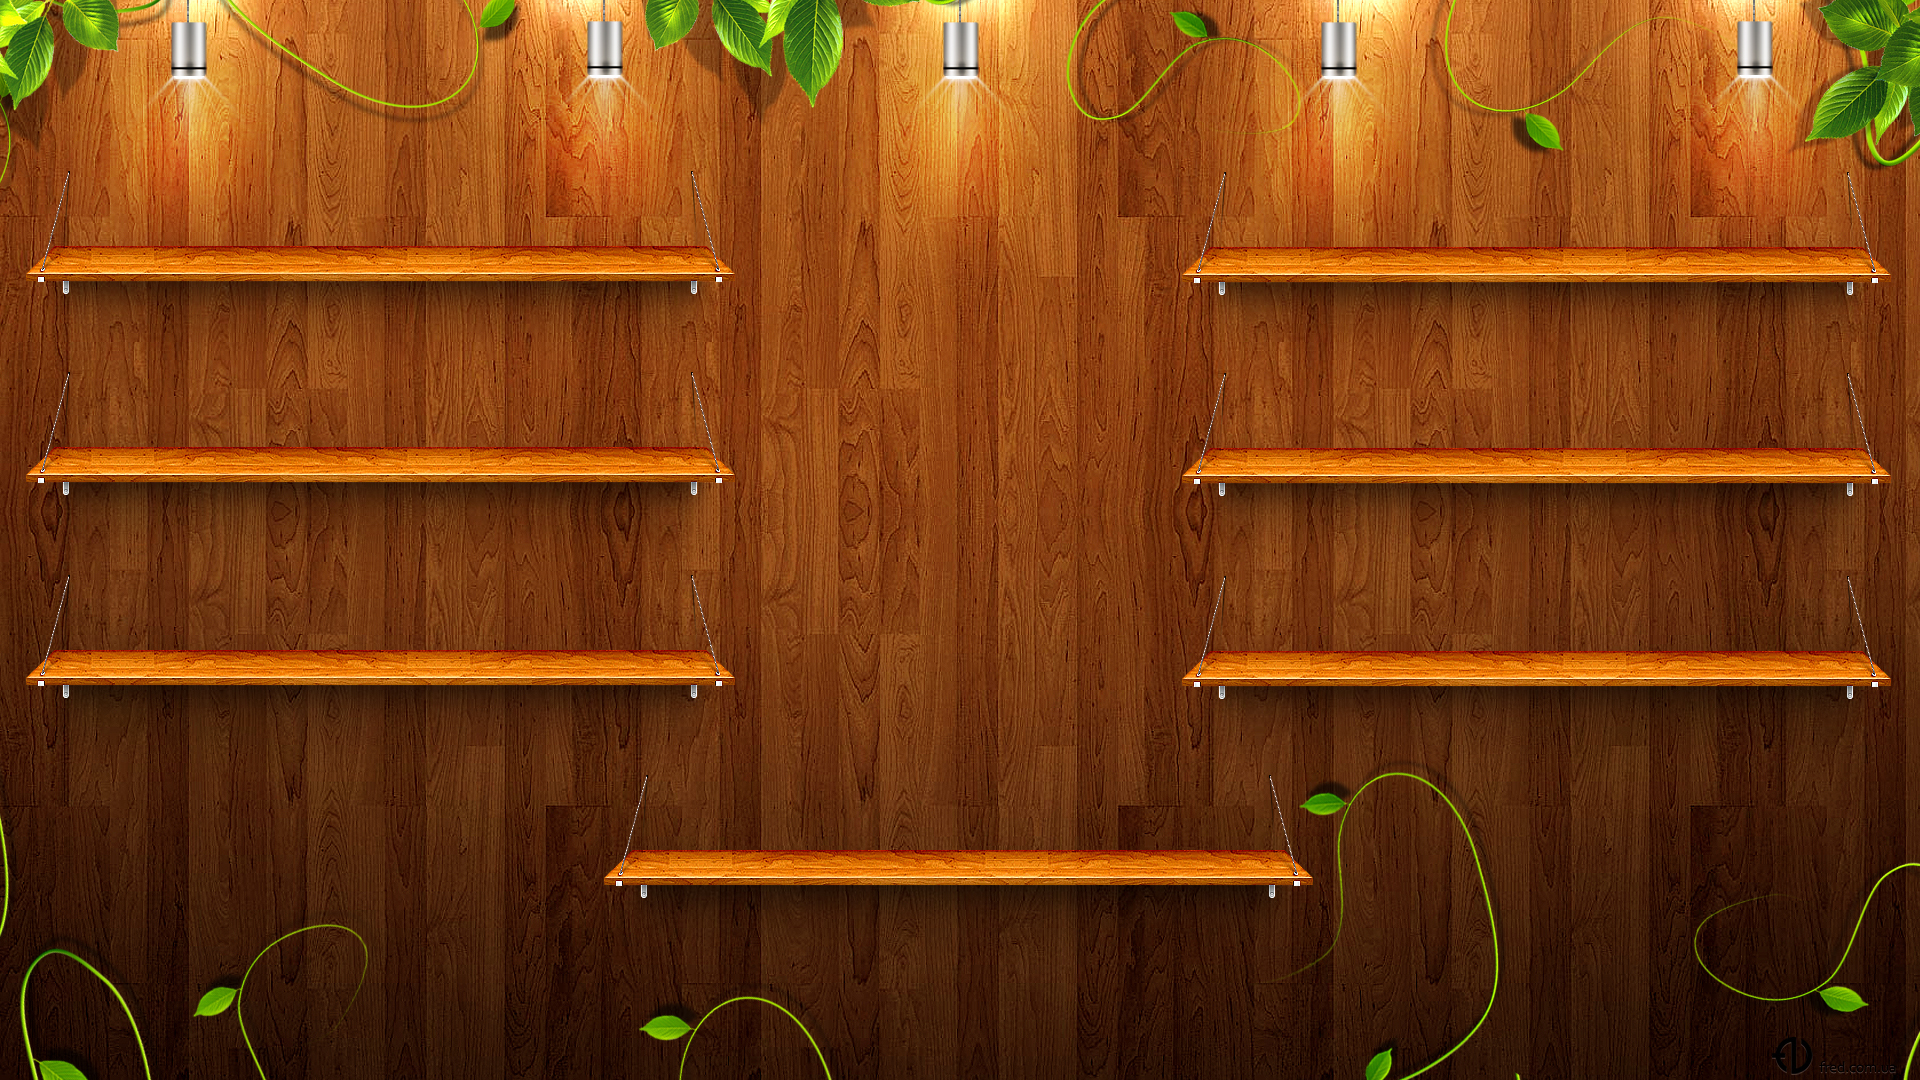 Free download Wooden shelves wallpaper and image wallpaper picture photo [1920x1080] for your Desktop, Mobile & Tablet. Explore Bookshelf Wallpaper for Desktop. Desktop Icon Shelf Wallpaper, Empty Bookshelf Wallpaper, Bookshelf Wallpaper